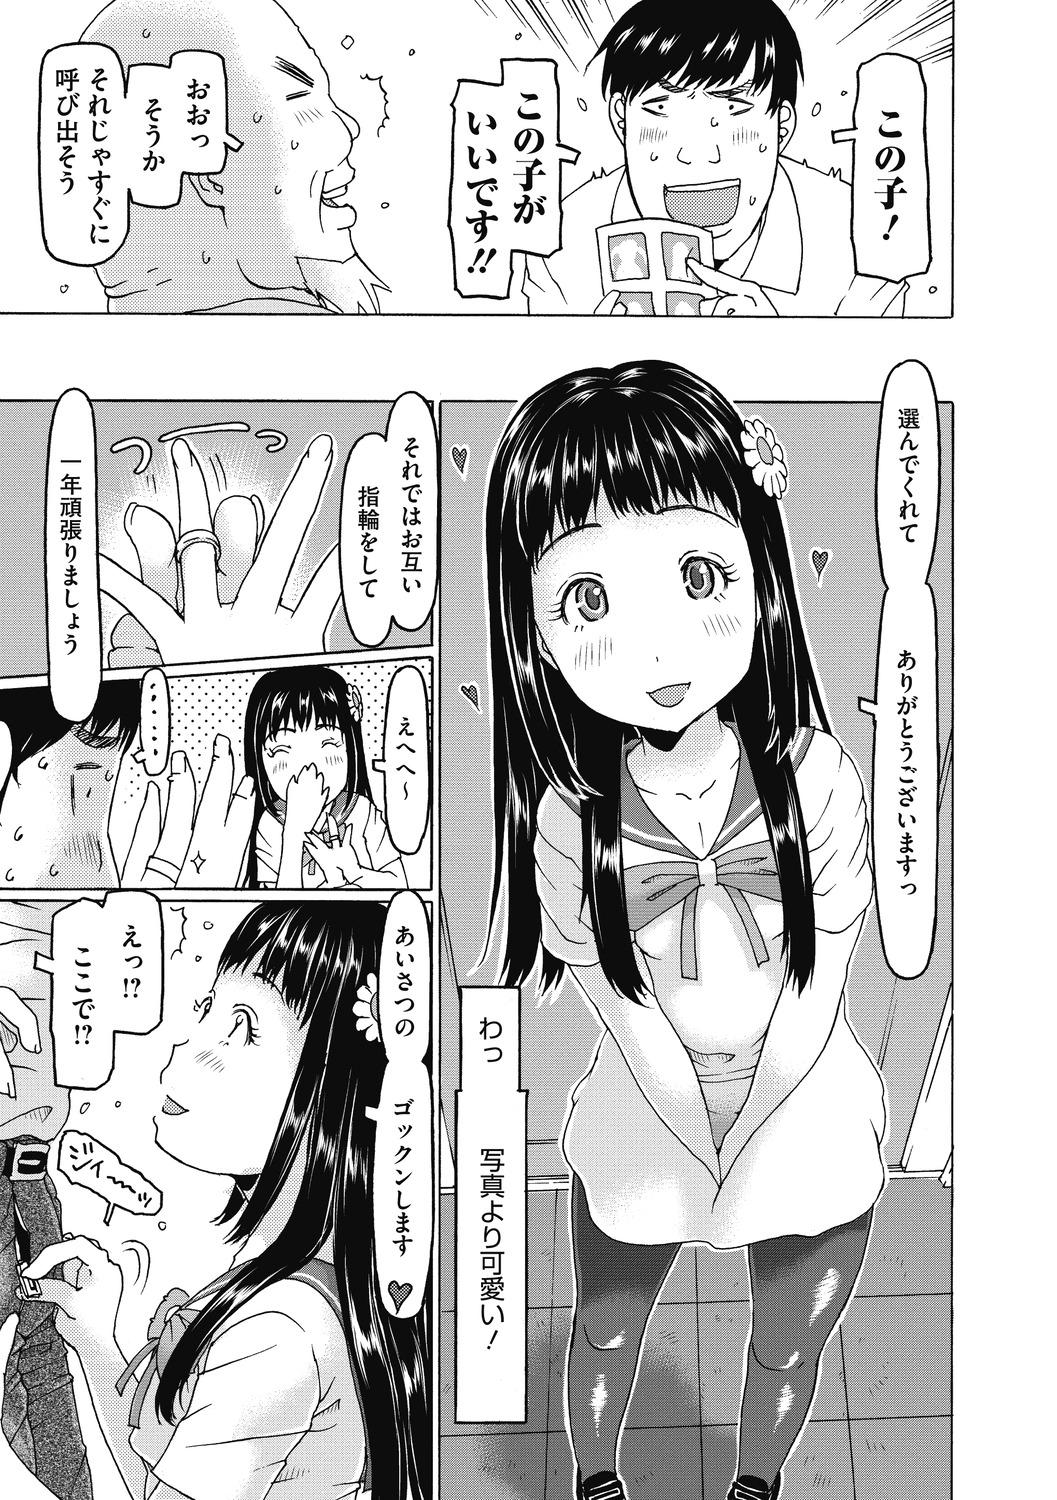 Cei Little Girl Strike Vol. 13 Relax - Page 7